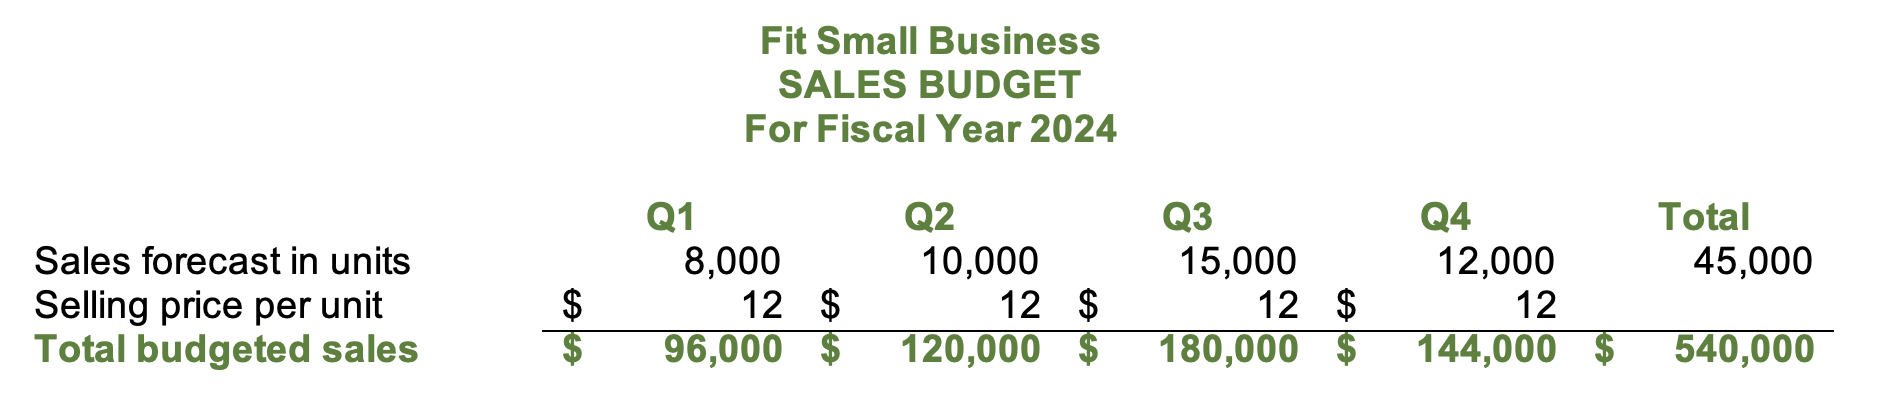 Image showing the sales budget